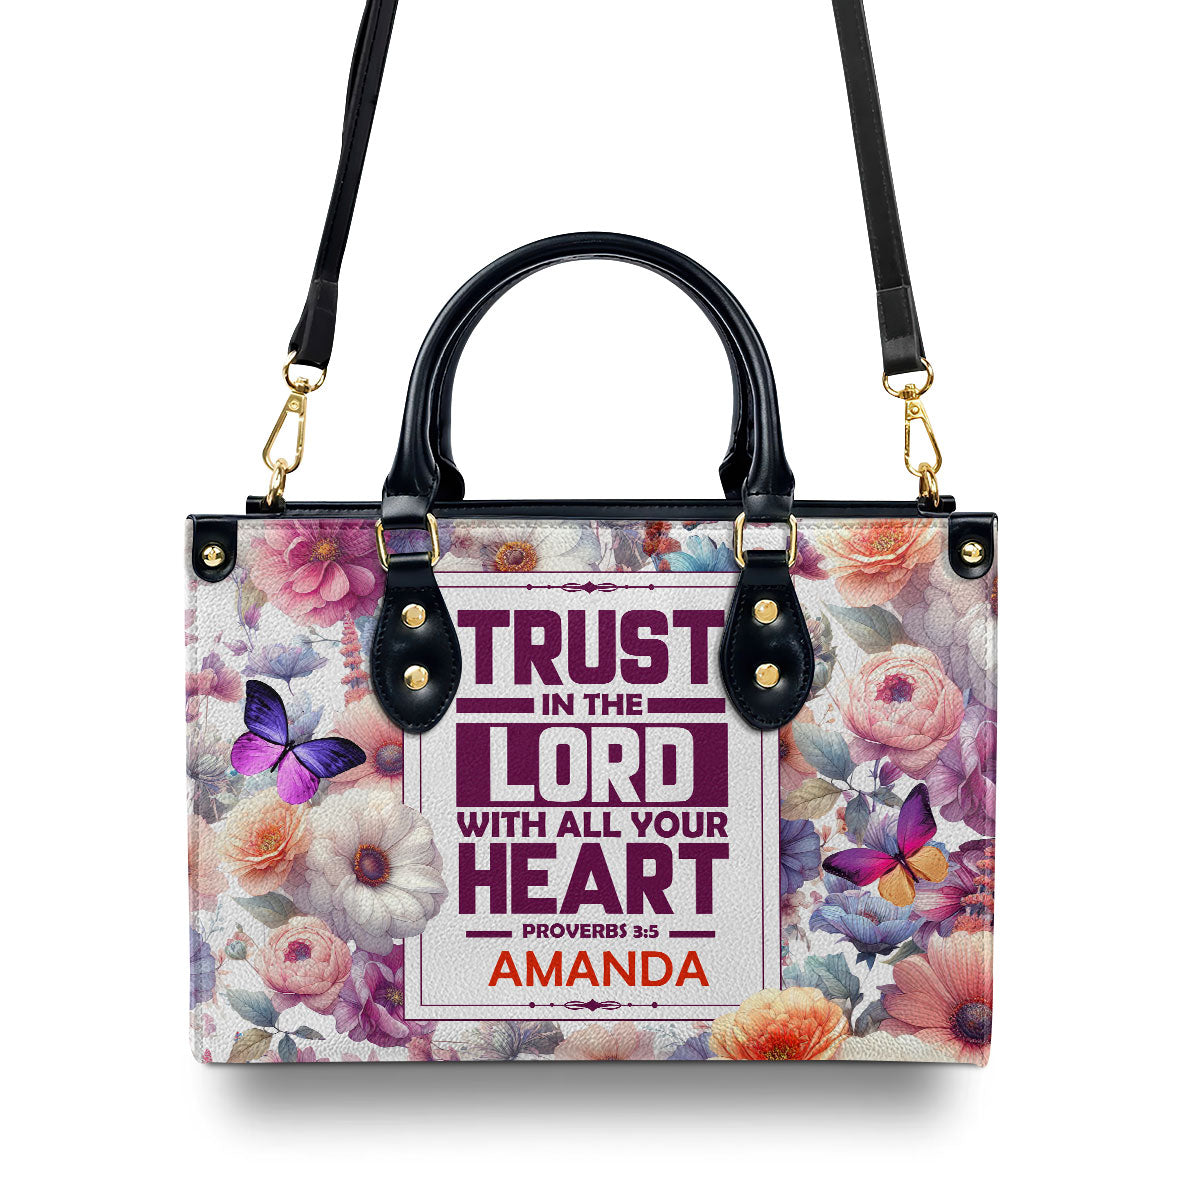 Trust In The Lord Personalized Leather Handbag - Custom Name Leather Handbags For Women